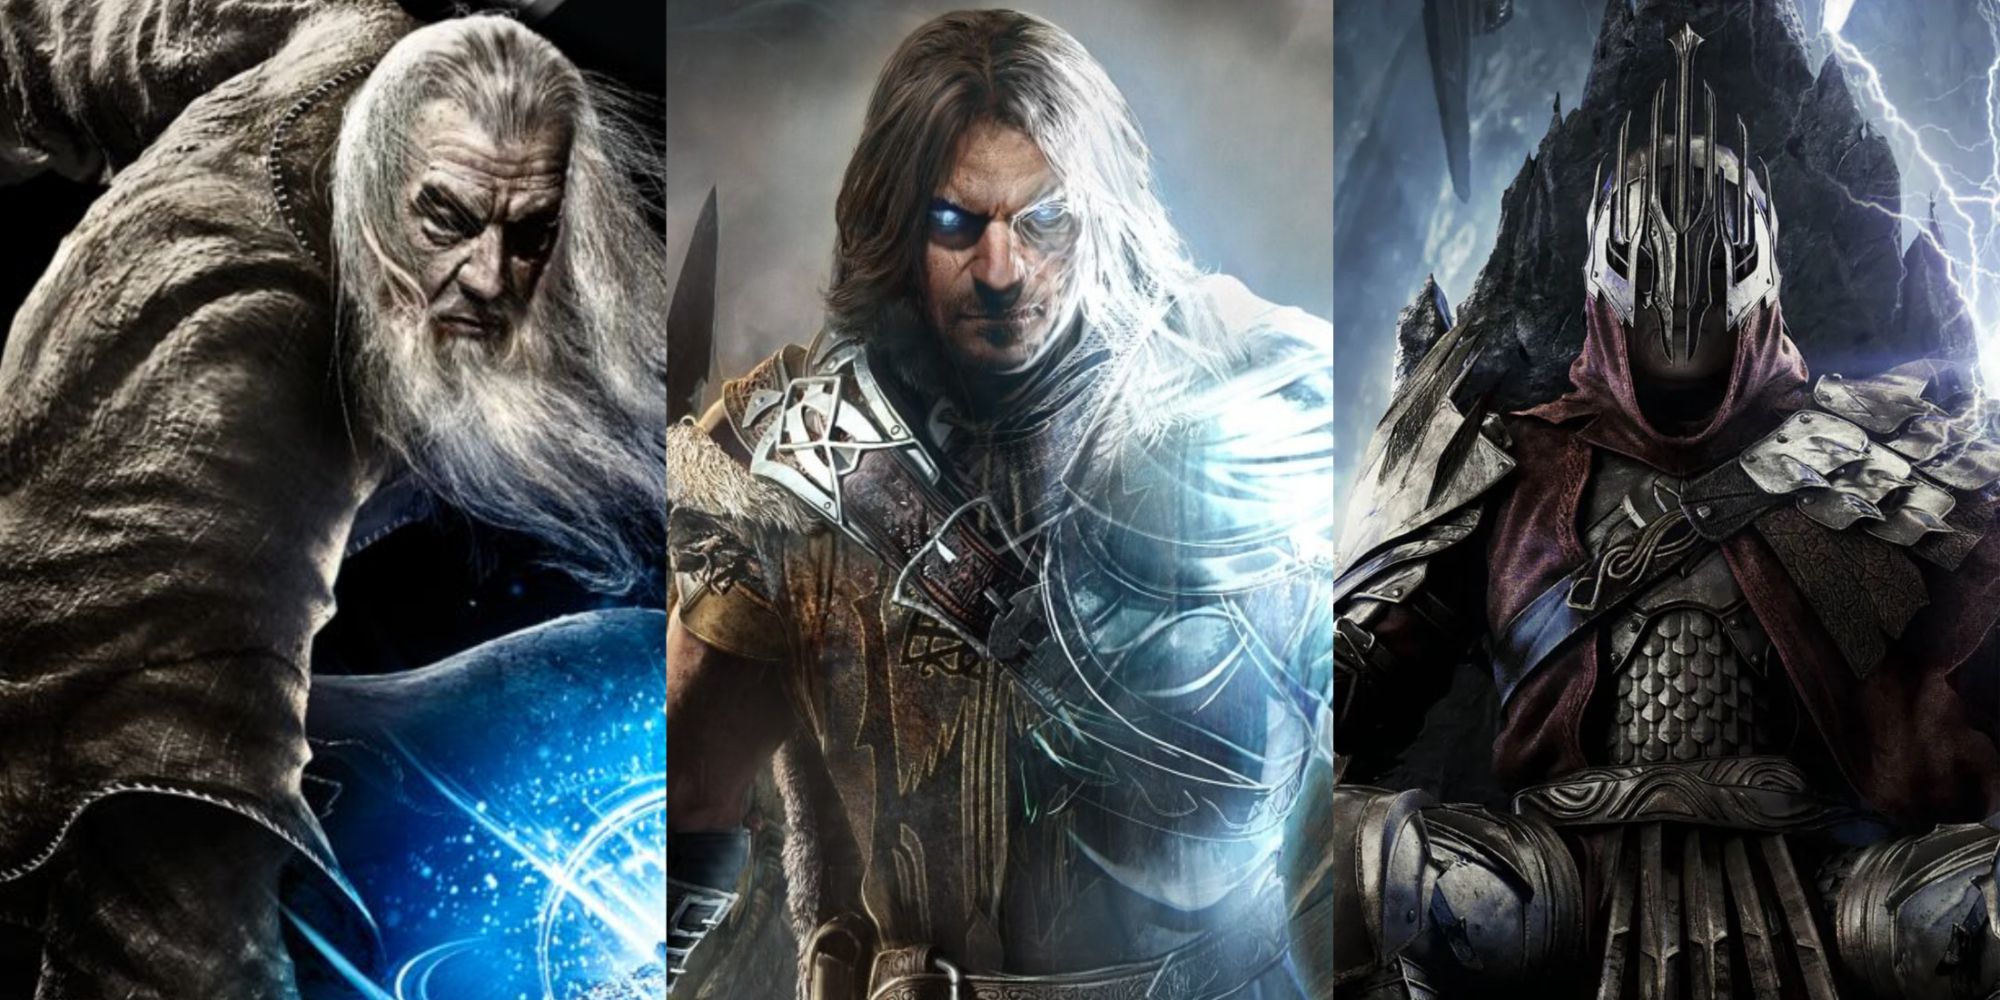 How Middle-earth: Shadow of Mordor stays true to Tolkien's fantasy universe